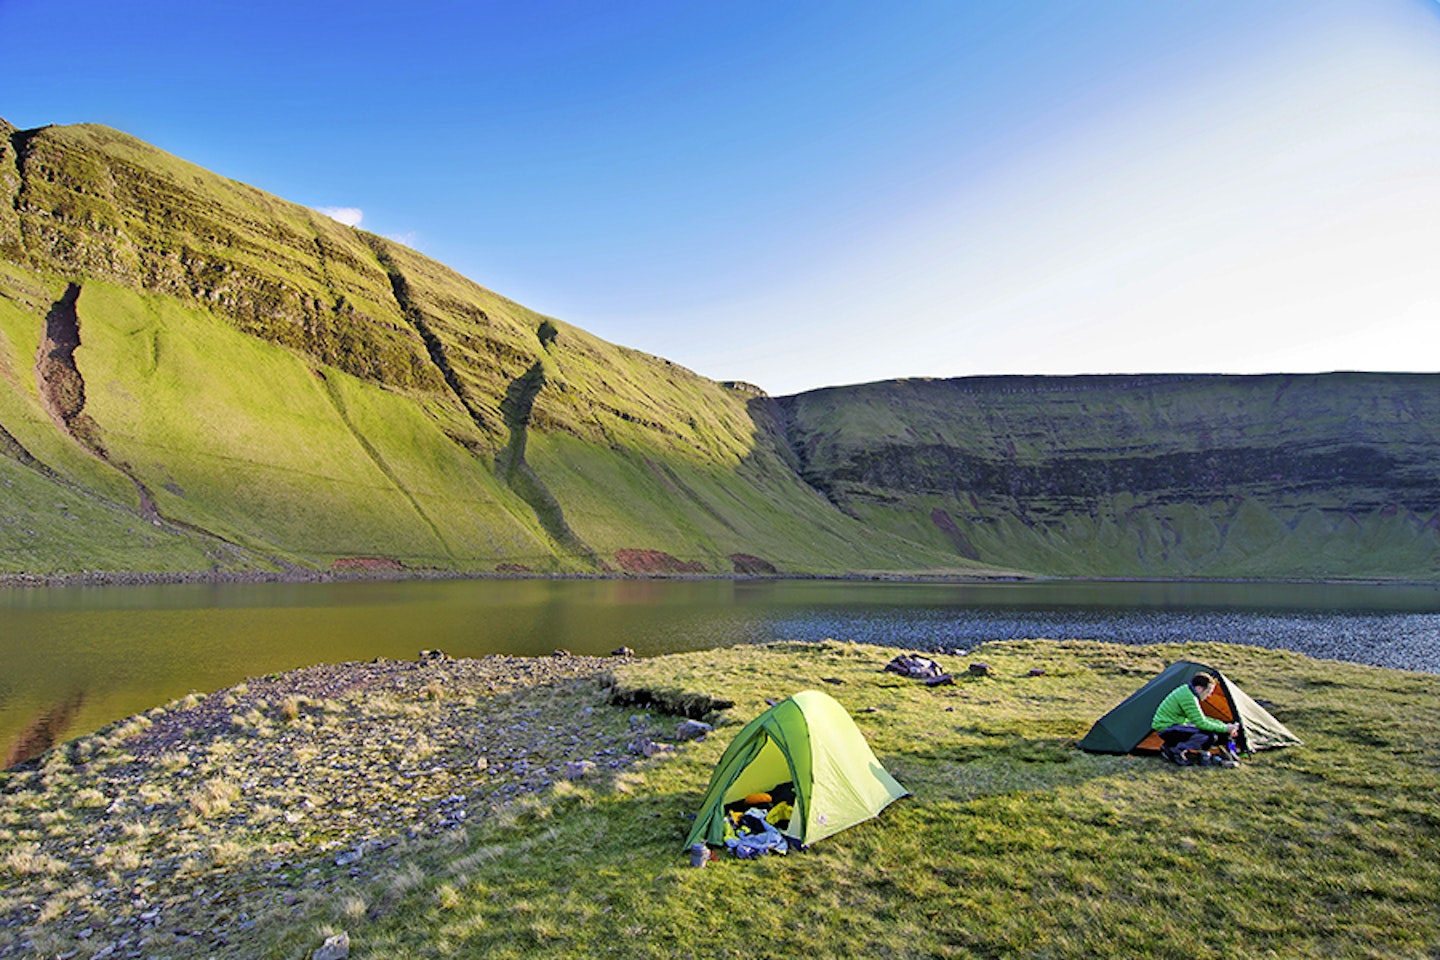 Wild camping beneath the surreal escarpments that characterise this magical walk in the Brecon Beacons.